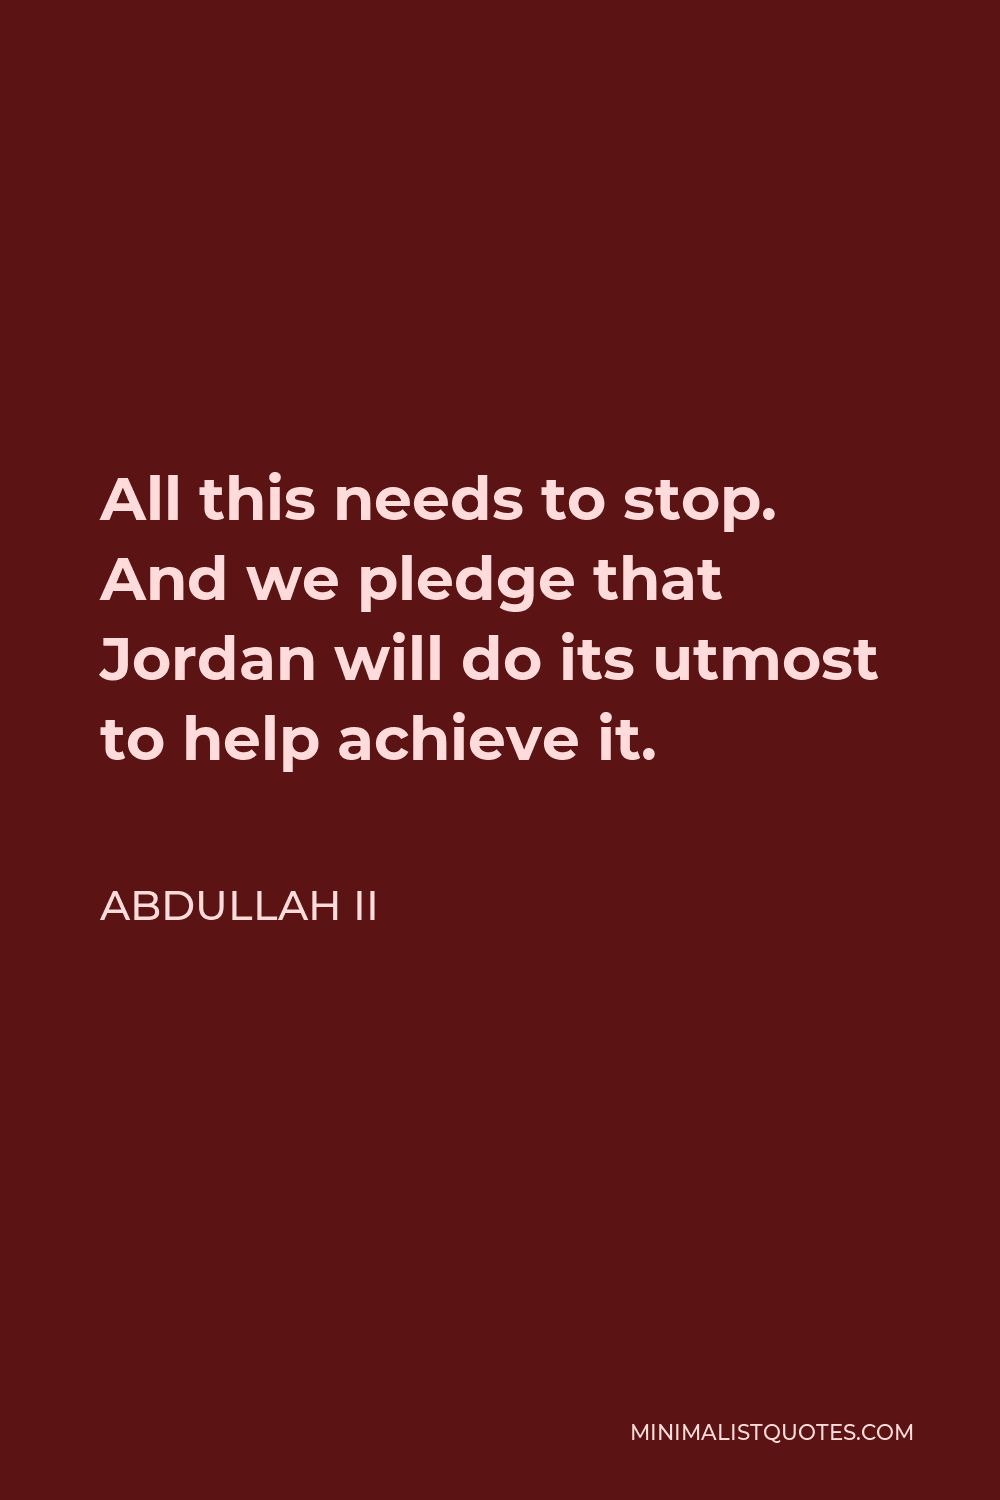 Abdullah II Quote - All this needs to stop. And we pledge that Jordan will do its utmost to help achieve it.